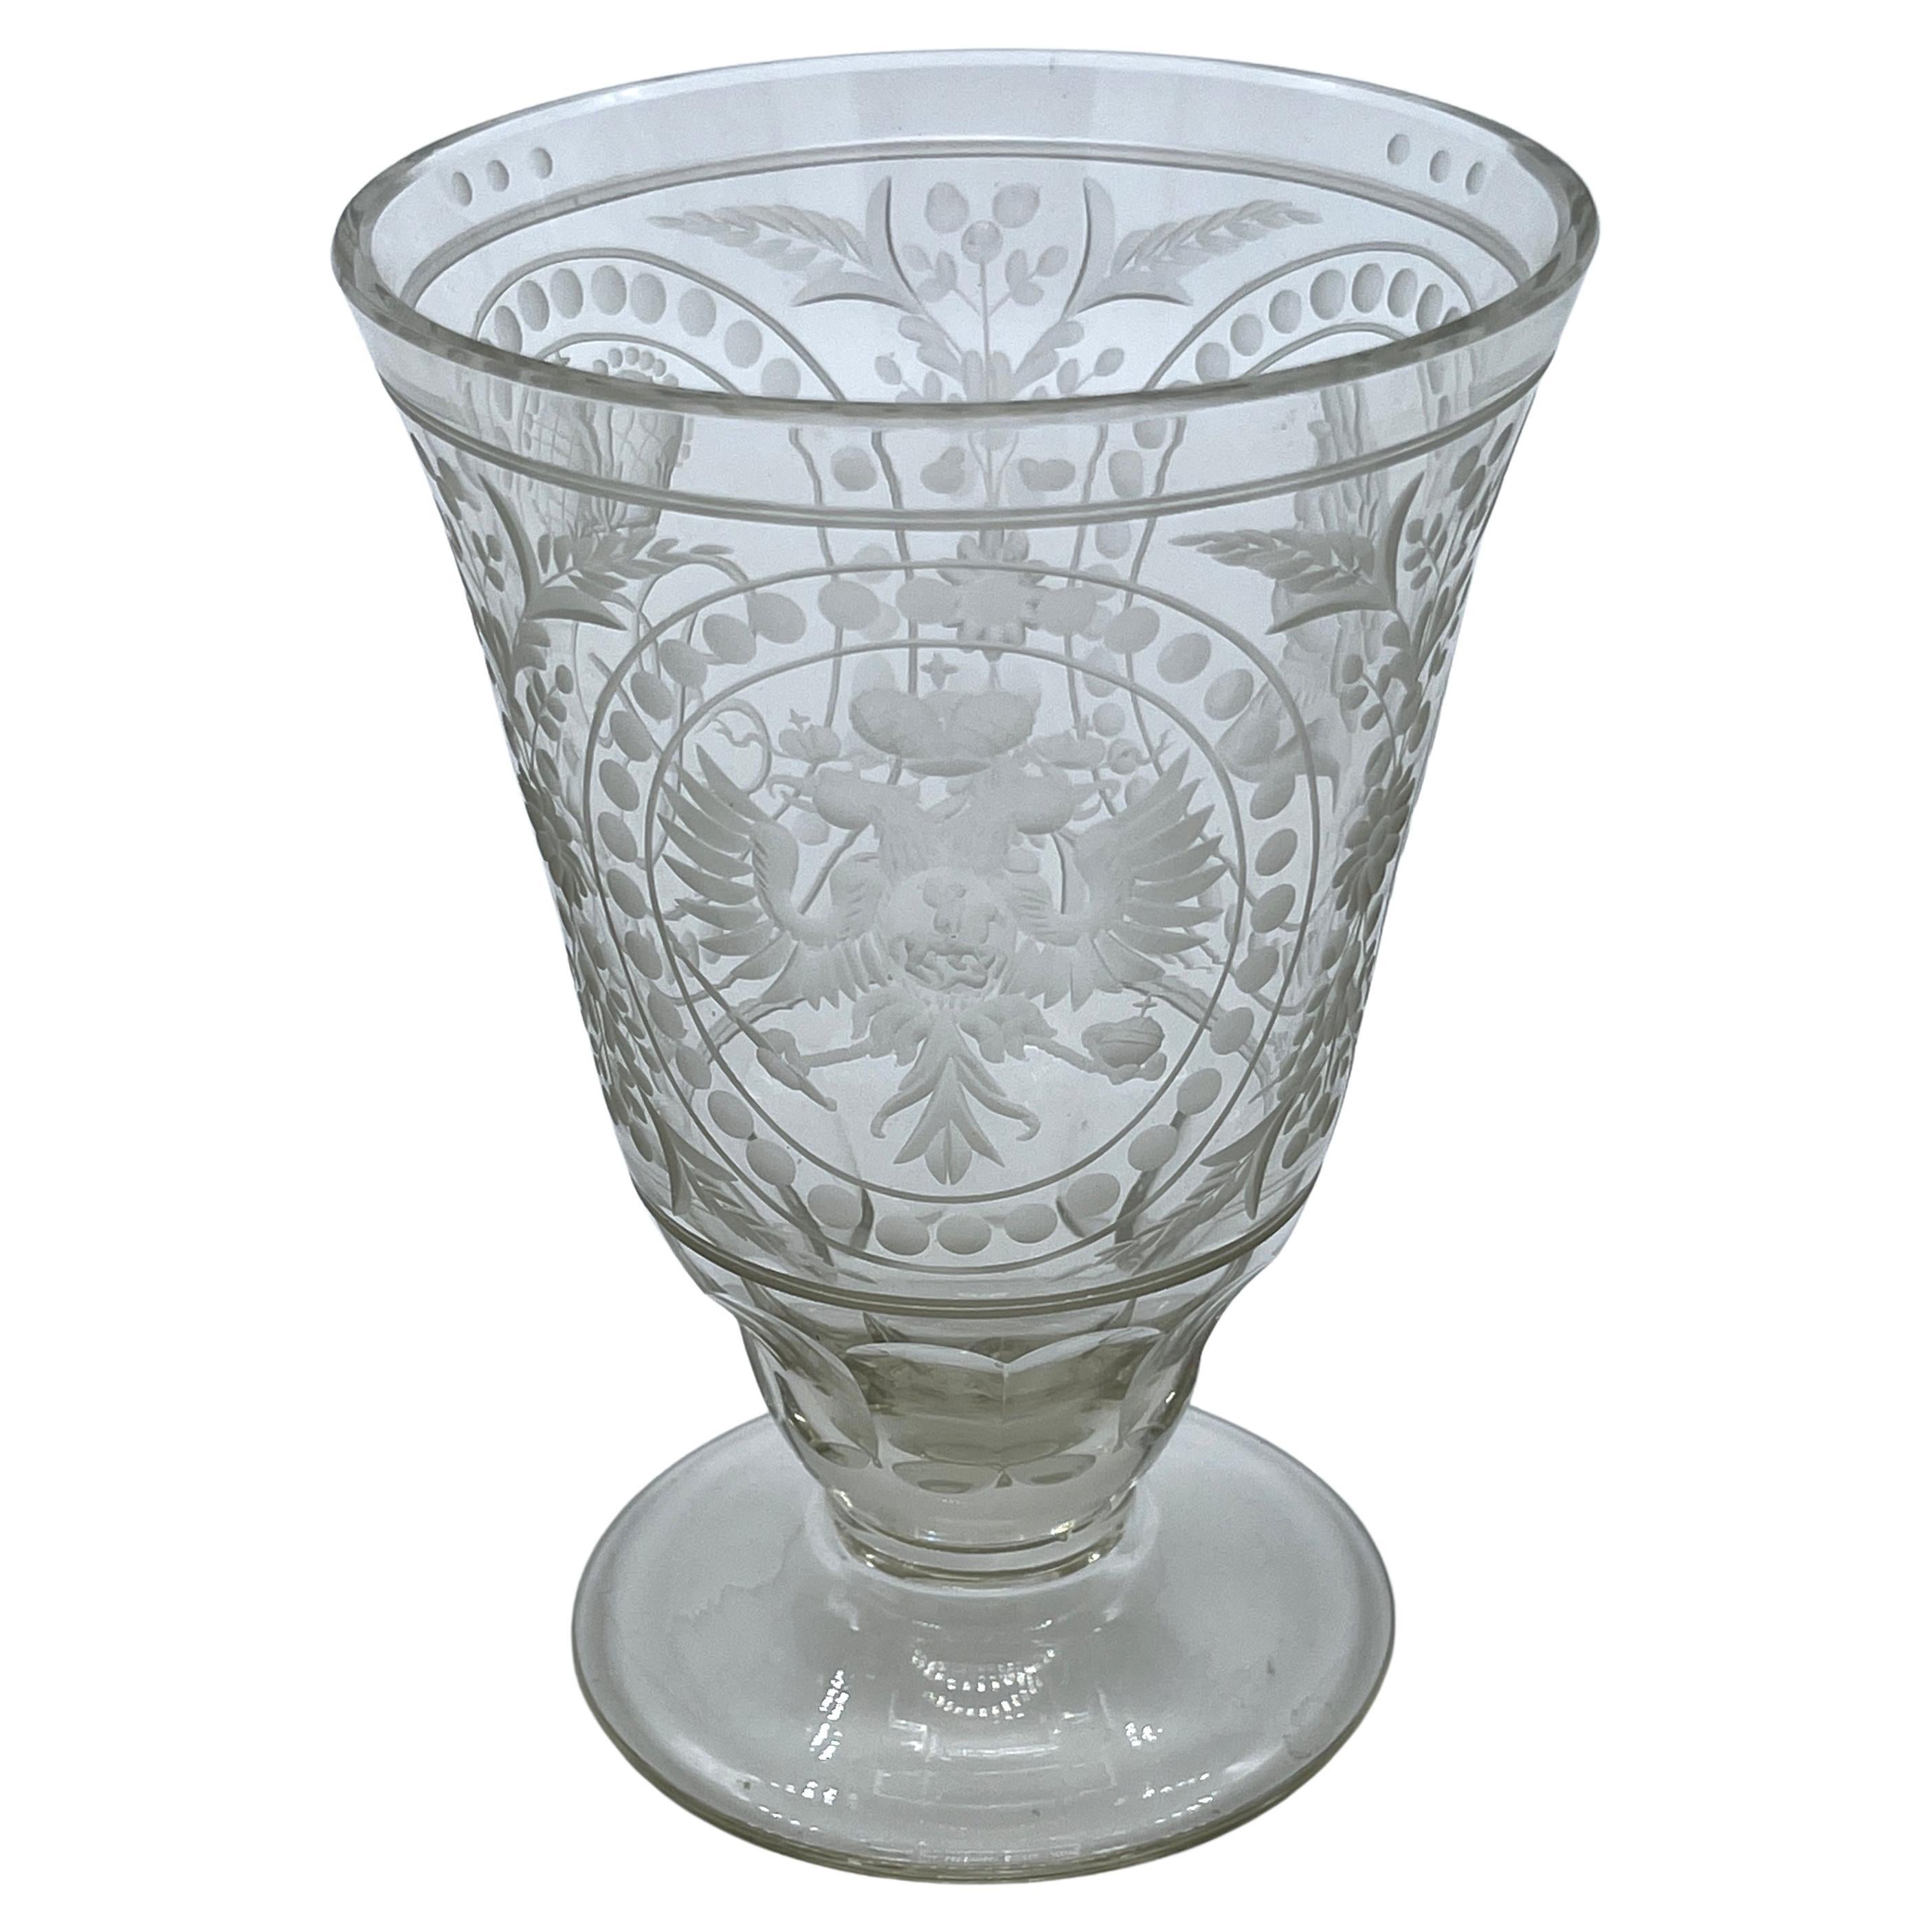 Russian Engraved Crystal Beaker, Commemorative of Alexander I, "The Blessed"